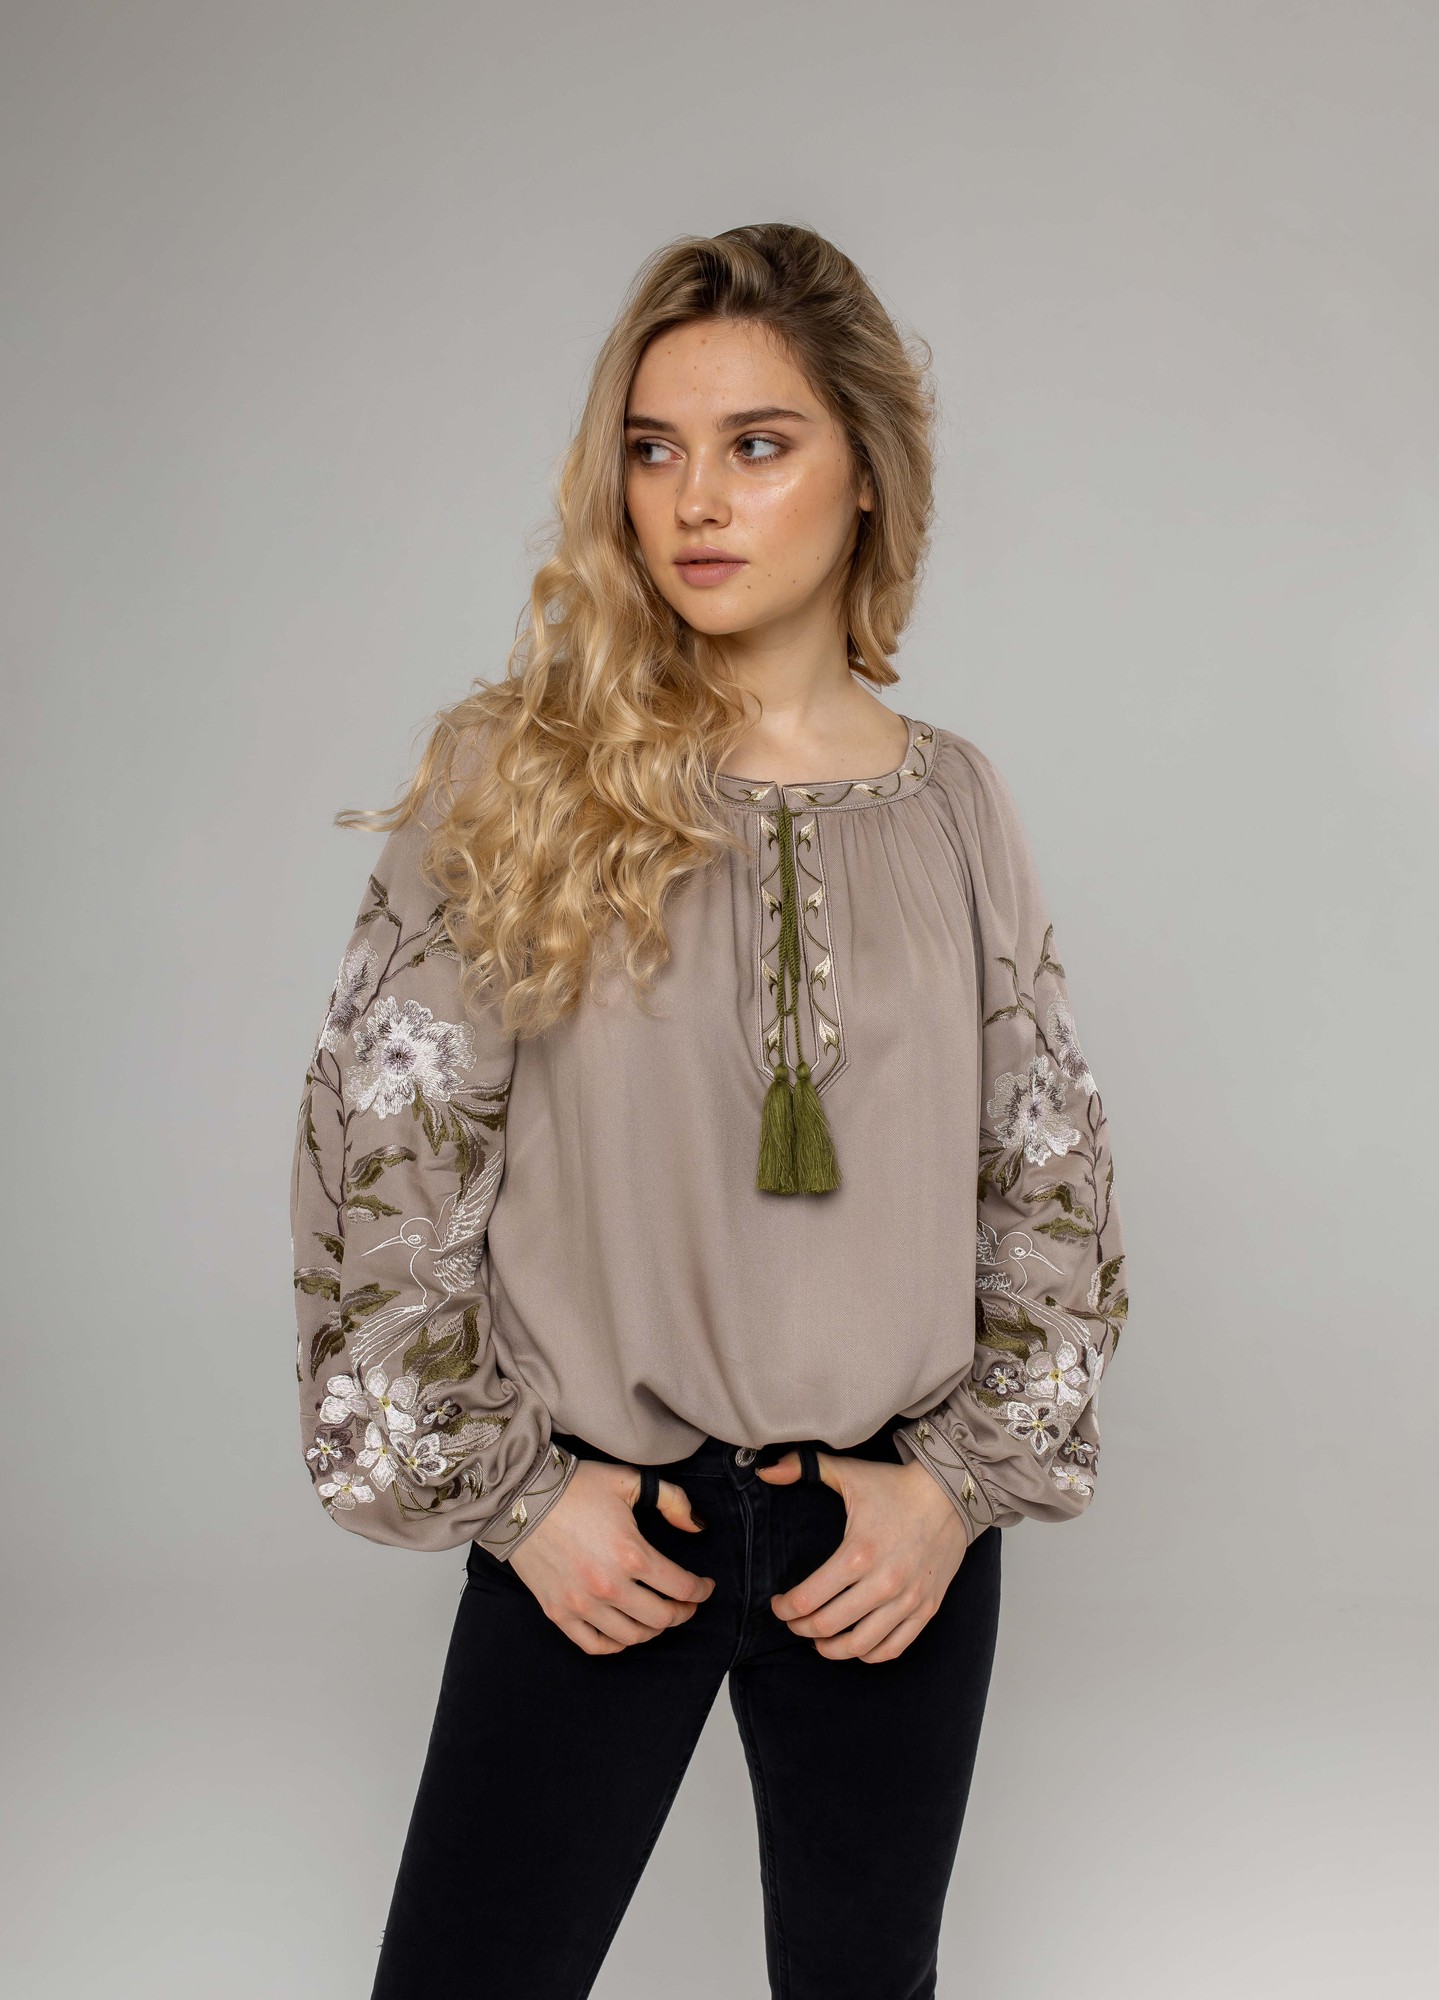 Women's embroidered blouse "Olha" gray